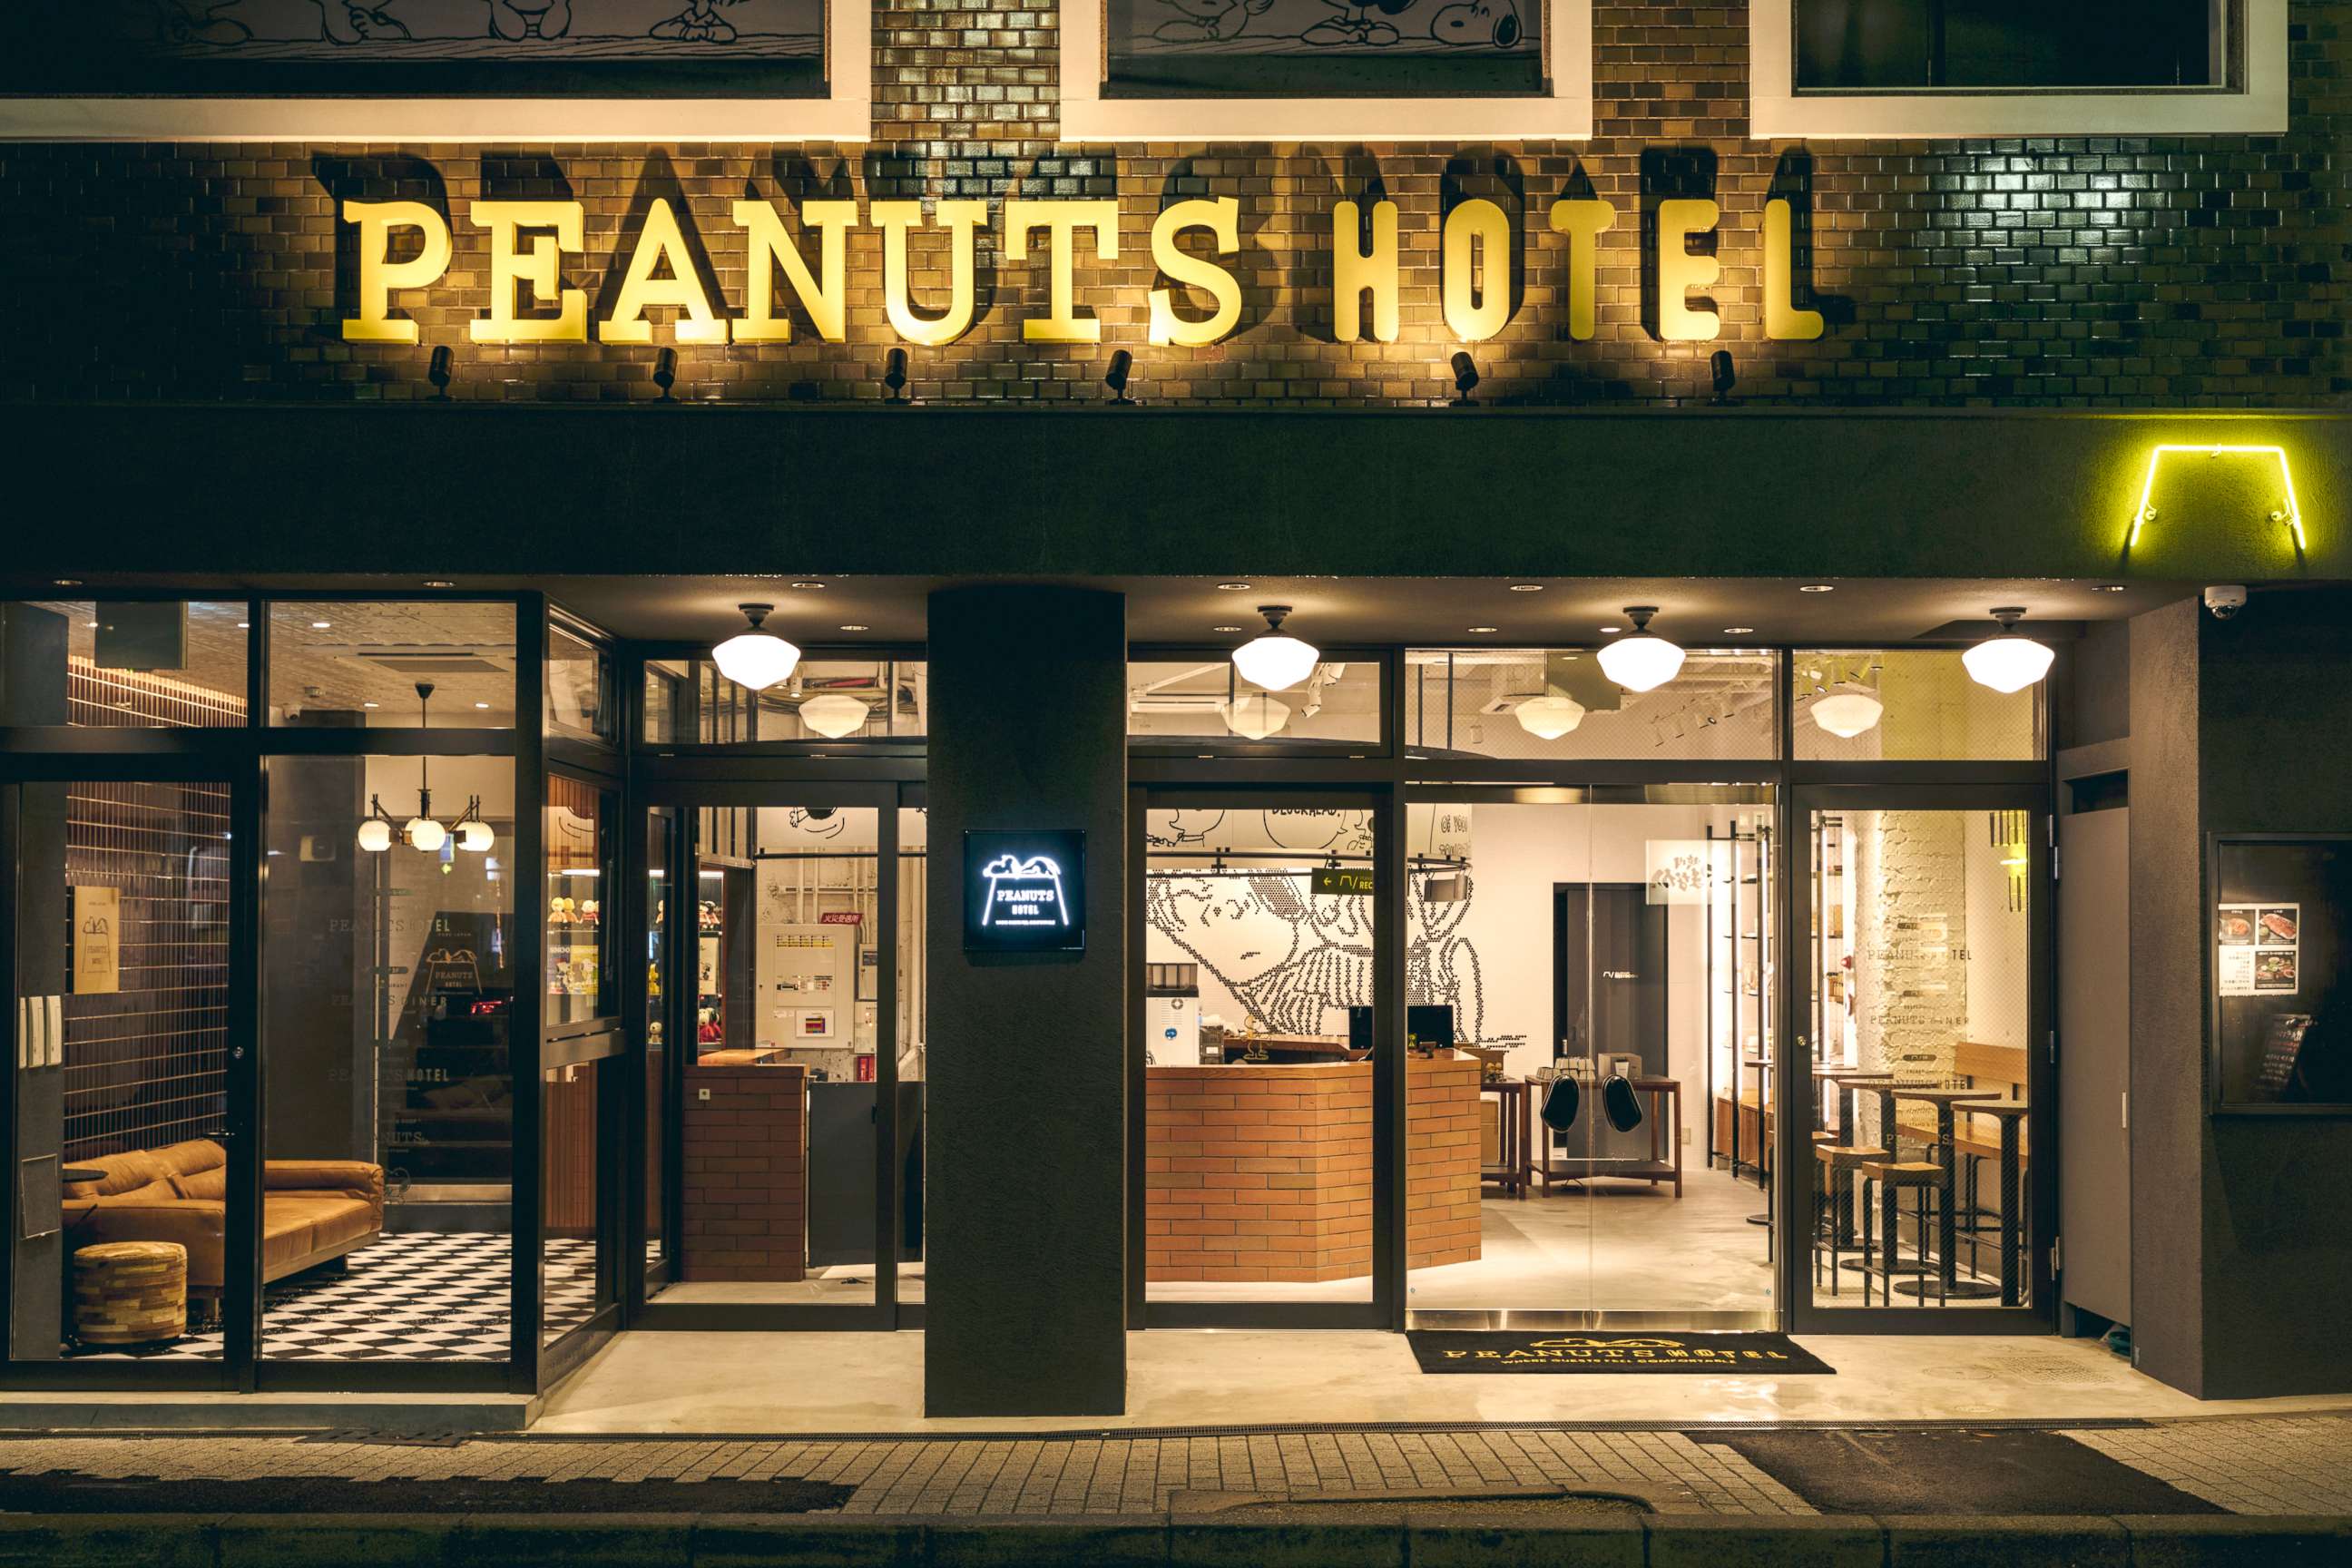 PHOTO: The new Peanuts hotel will allow fans to come together and enjoy their passion and love for the Peanuts brand.